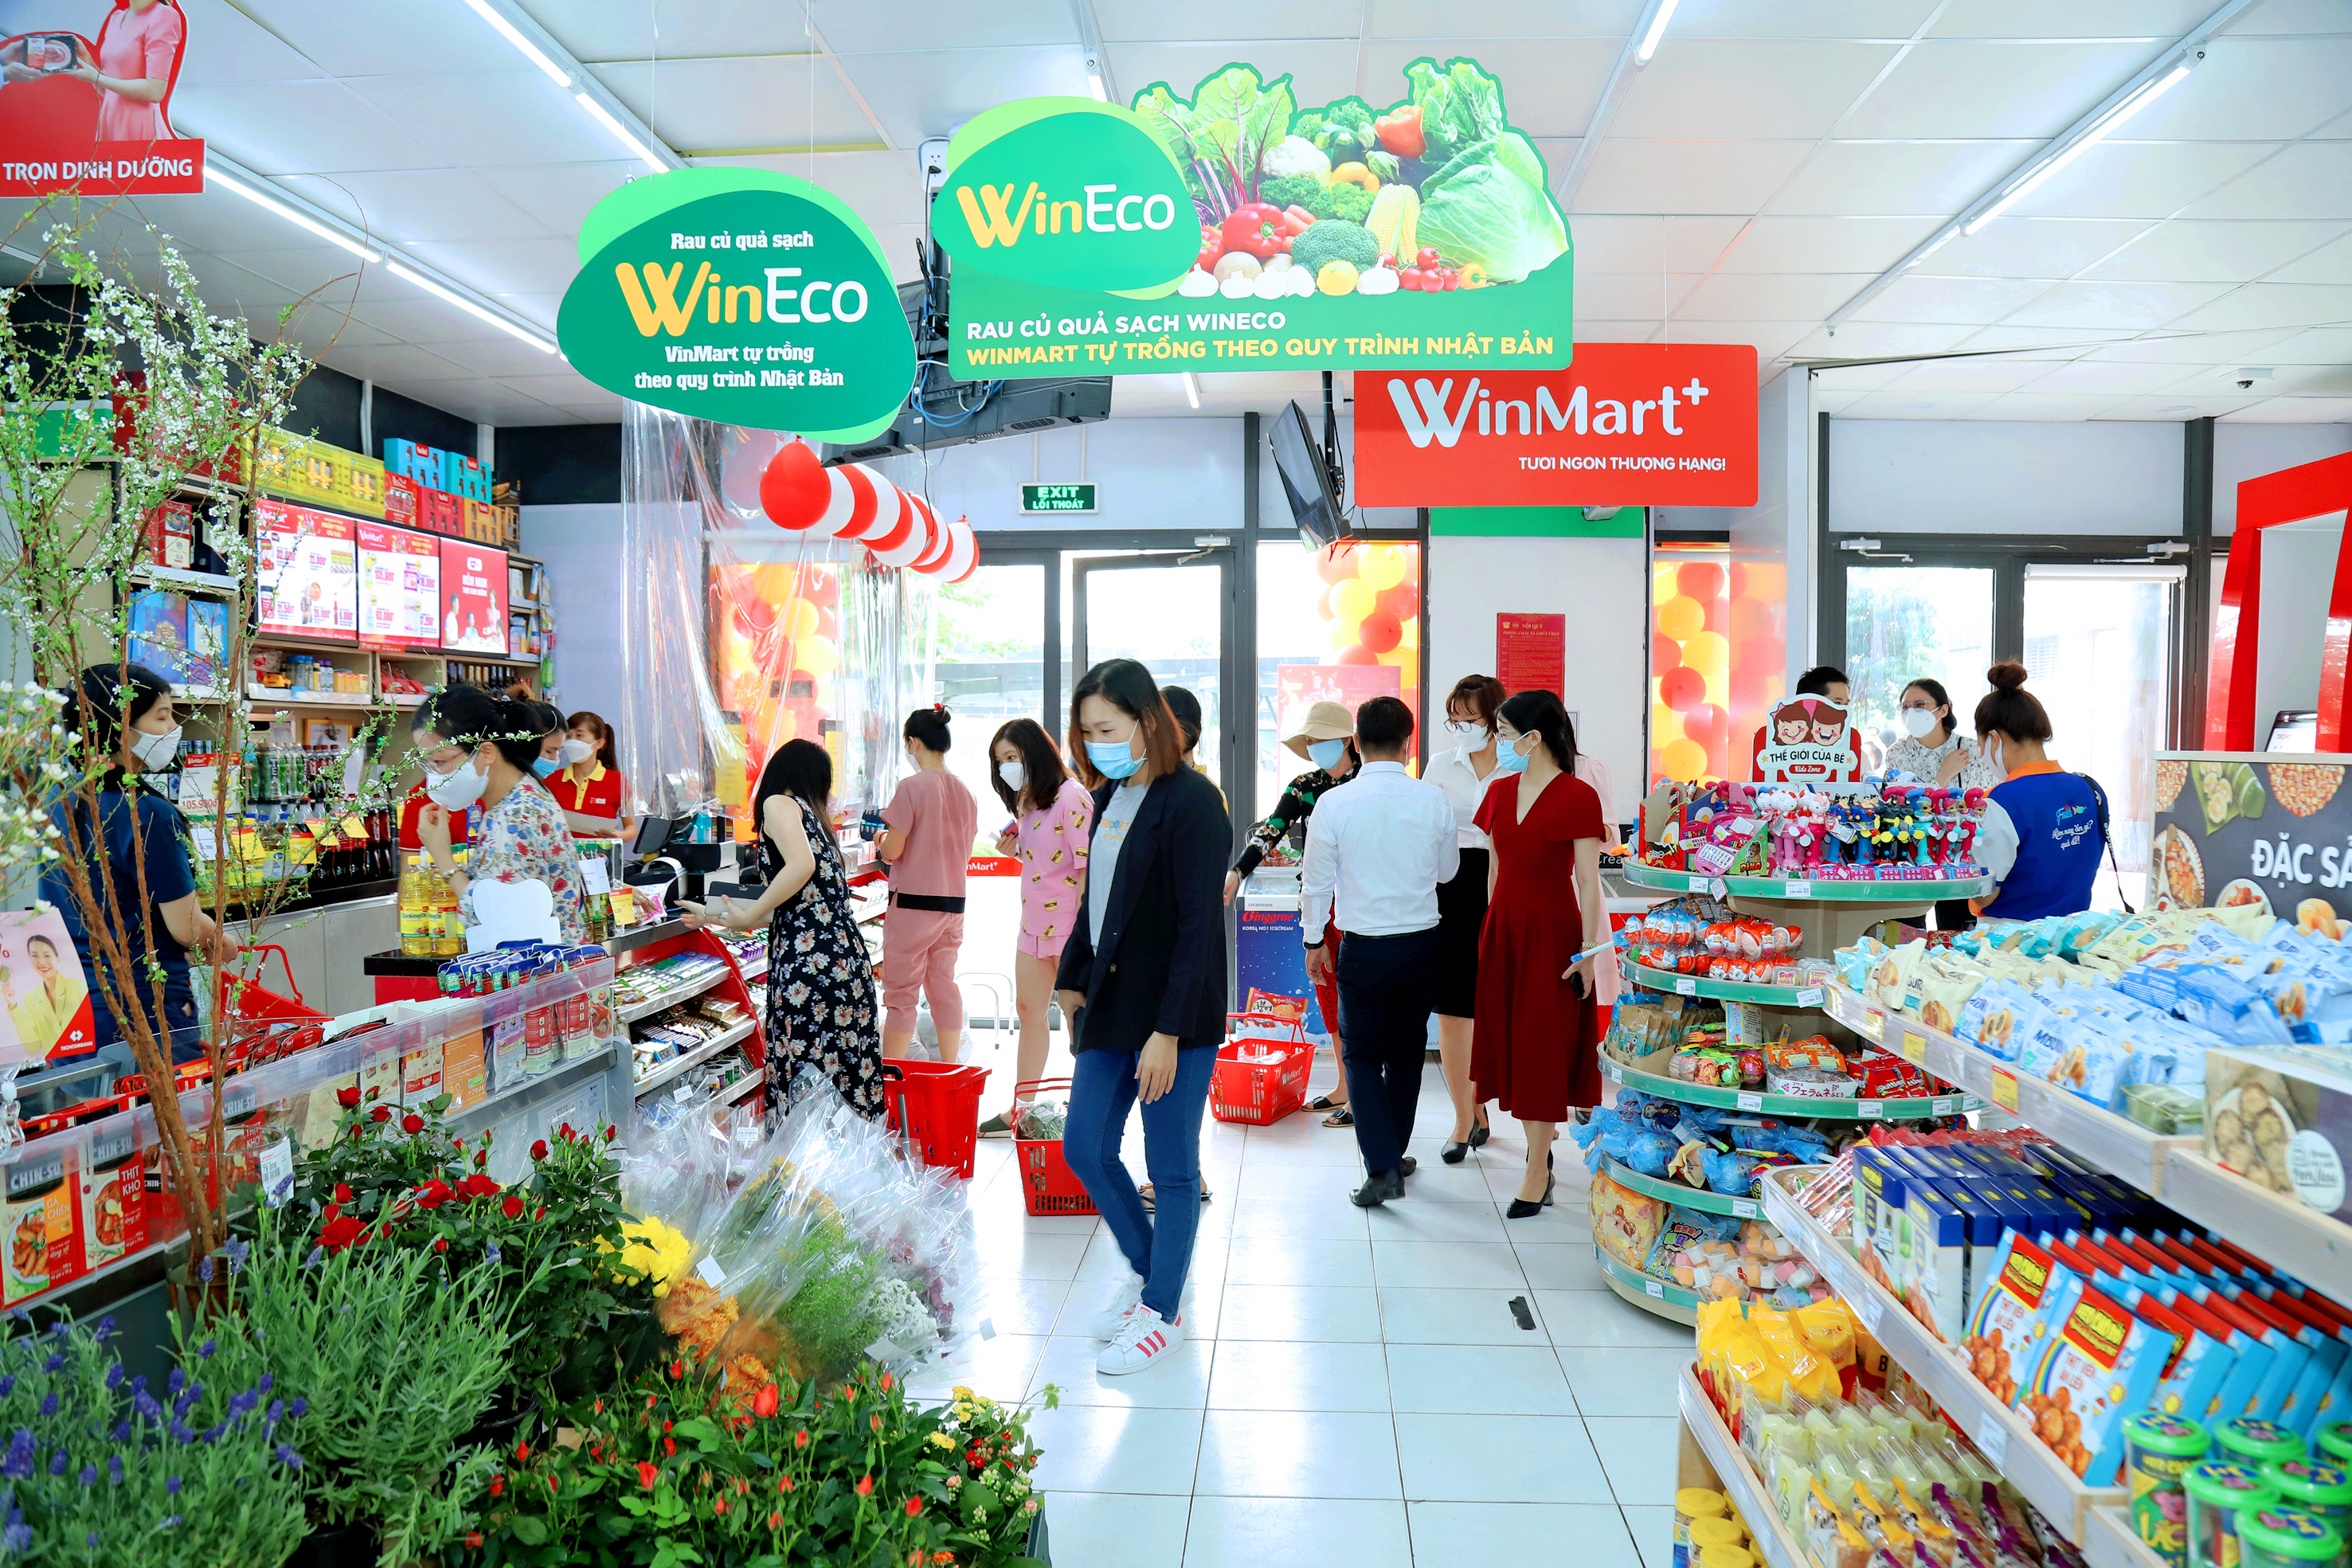 People shop at a retail store operated by Masan Group.